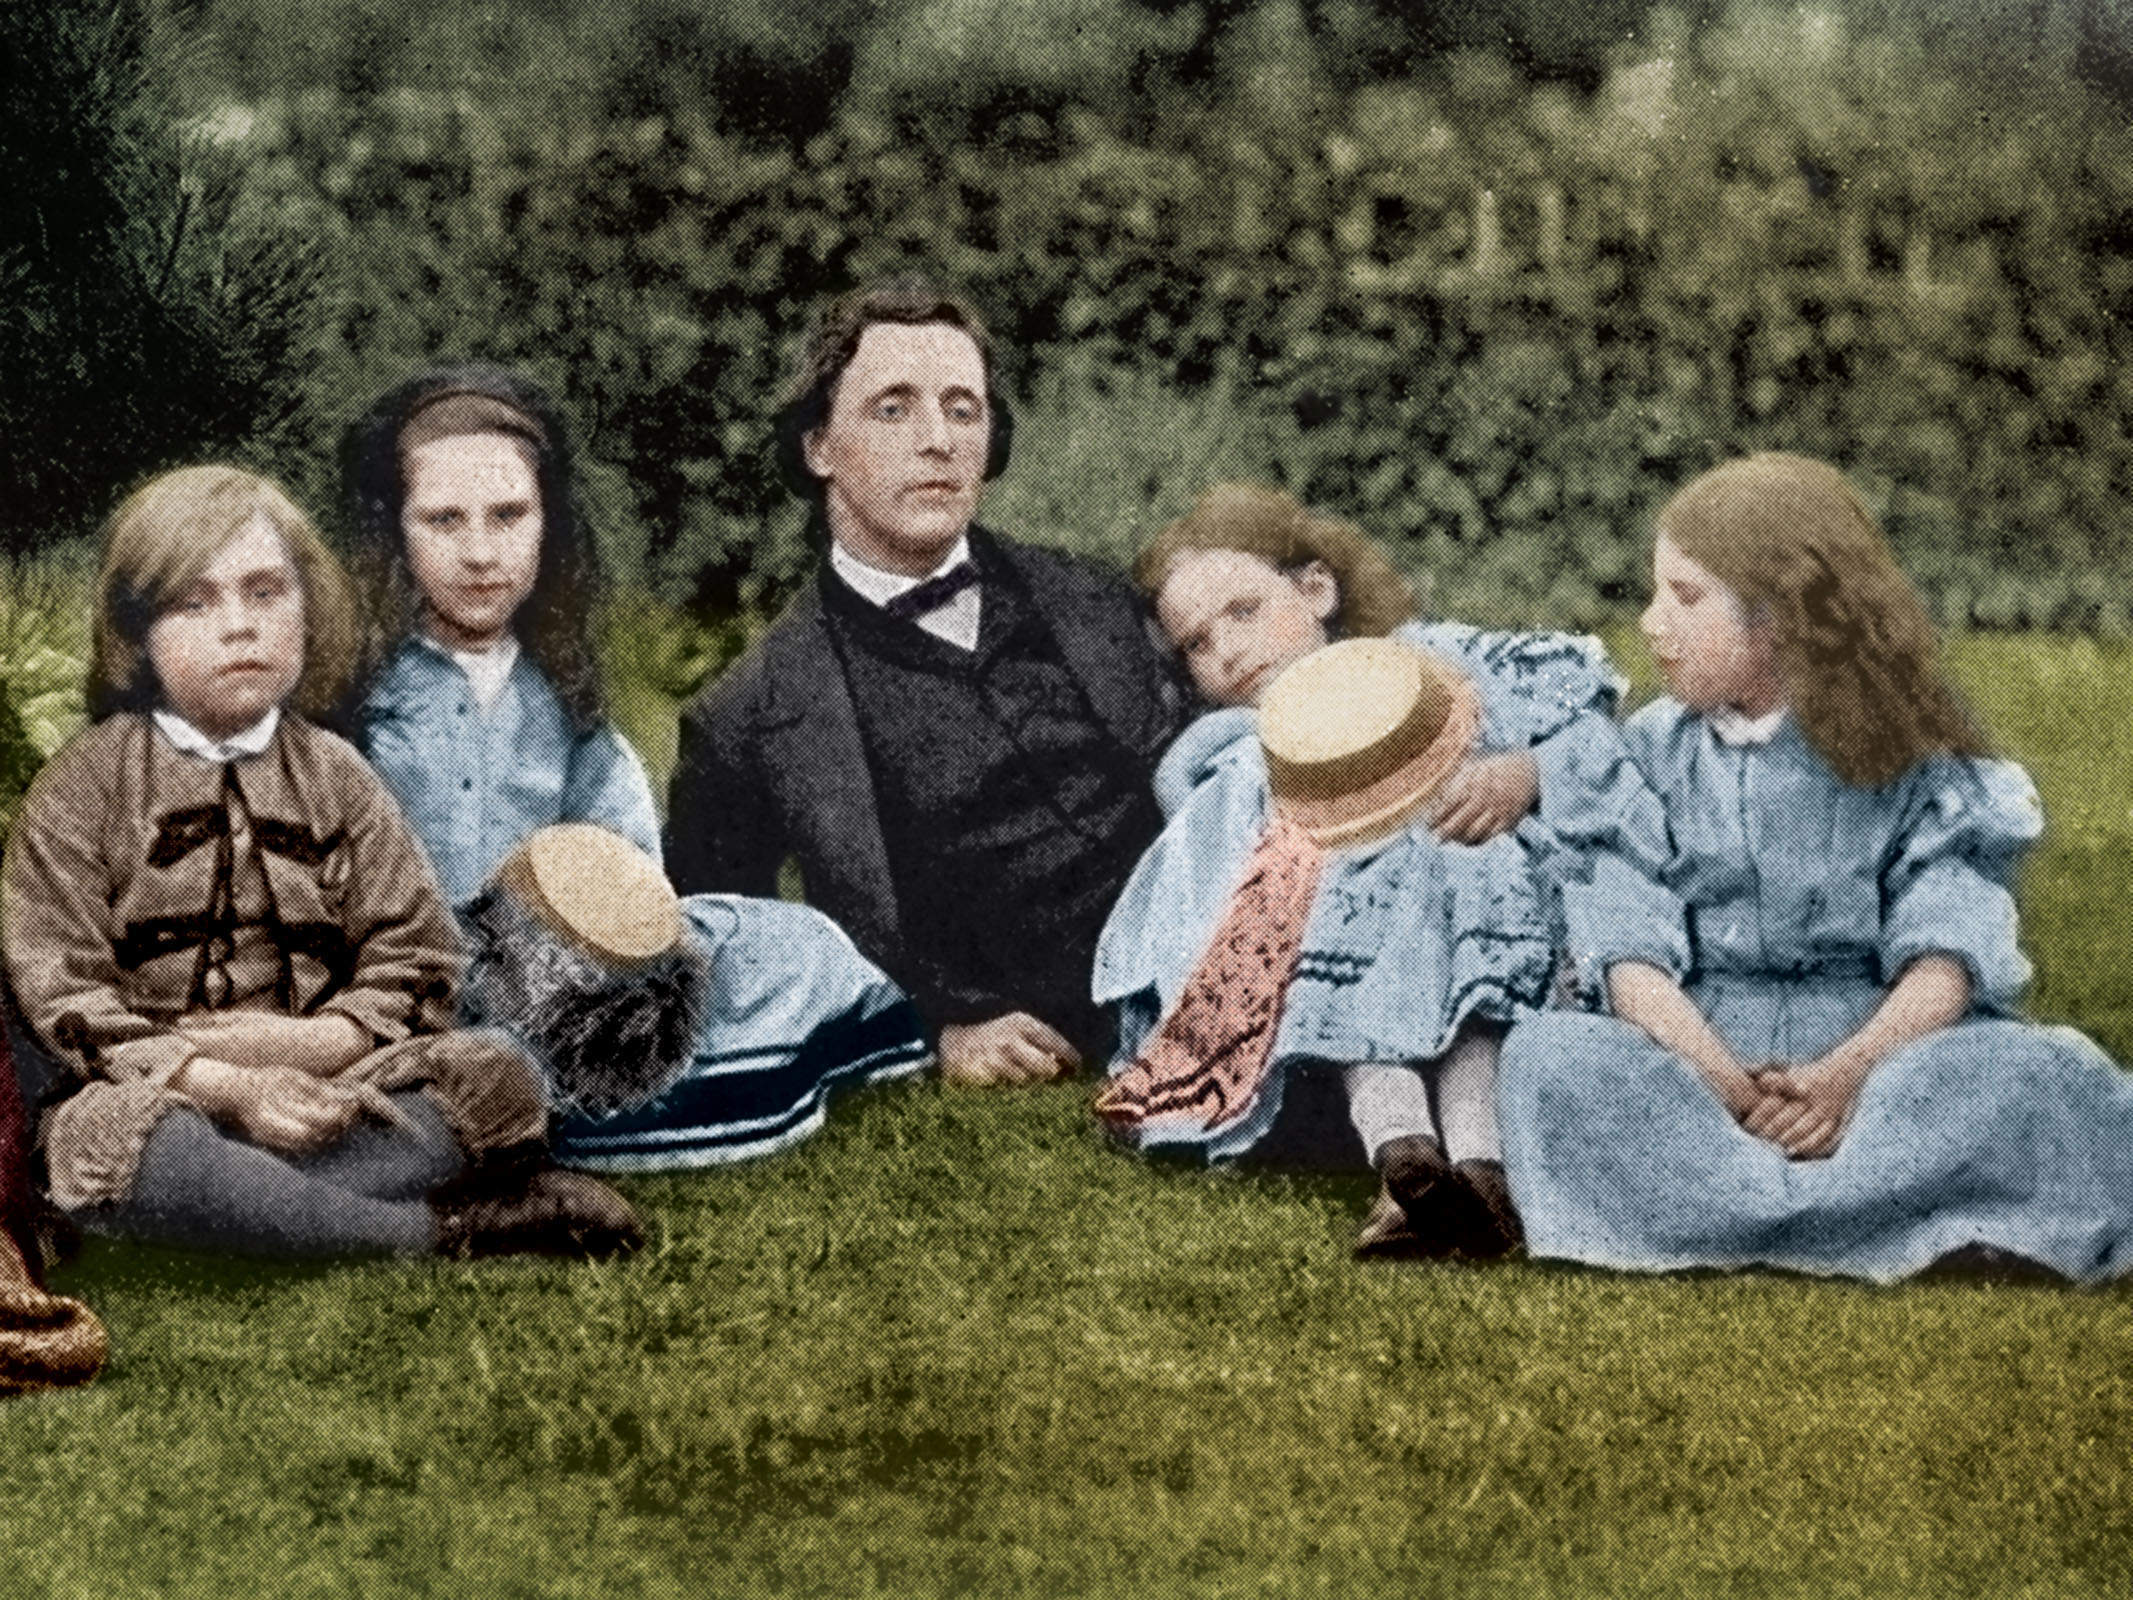 He grew up as a mathematician and became famous as a writer: Who is Lewis Carroll?